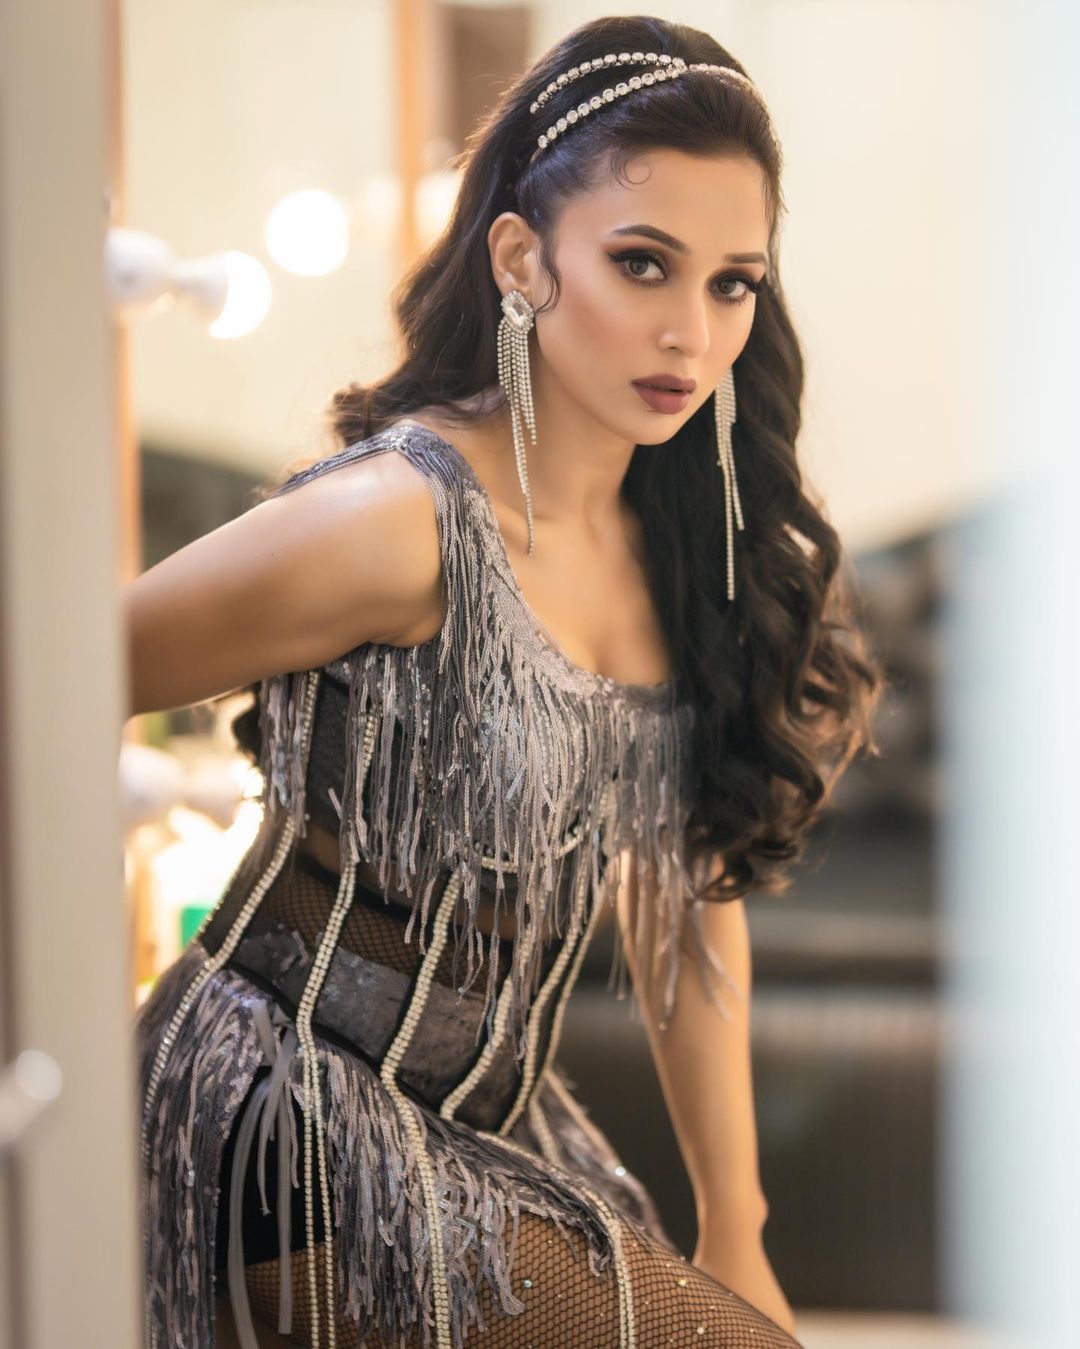 Mimi-Chakraborty's-bold-and-fiery-look-in-a-stunning-outfit-is-too-hot-to-handle-See-the-pictures-06-Bengalplanet.com